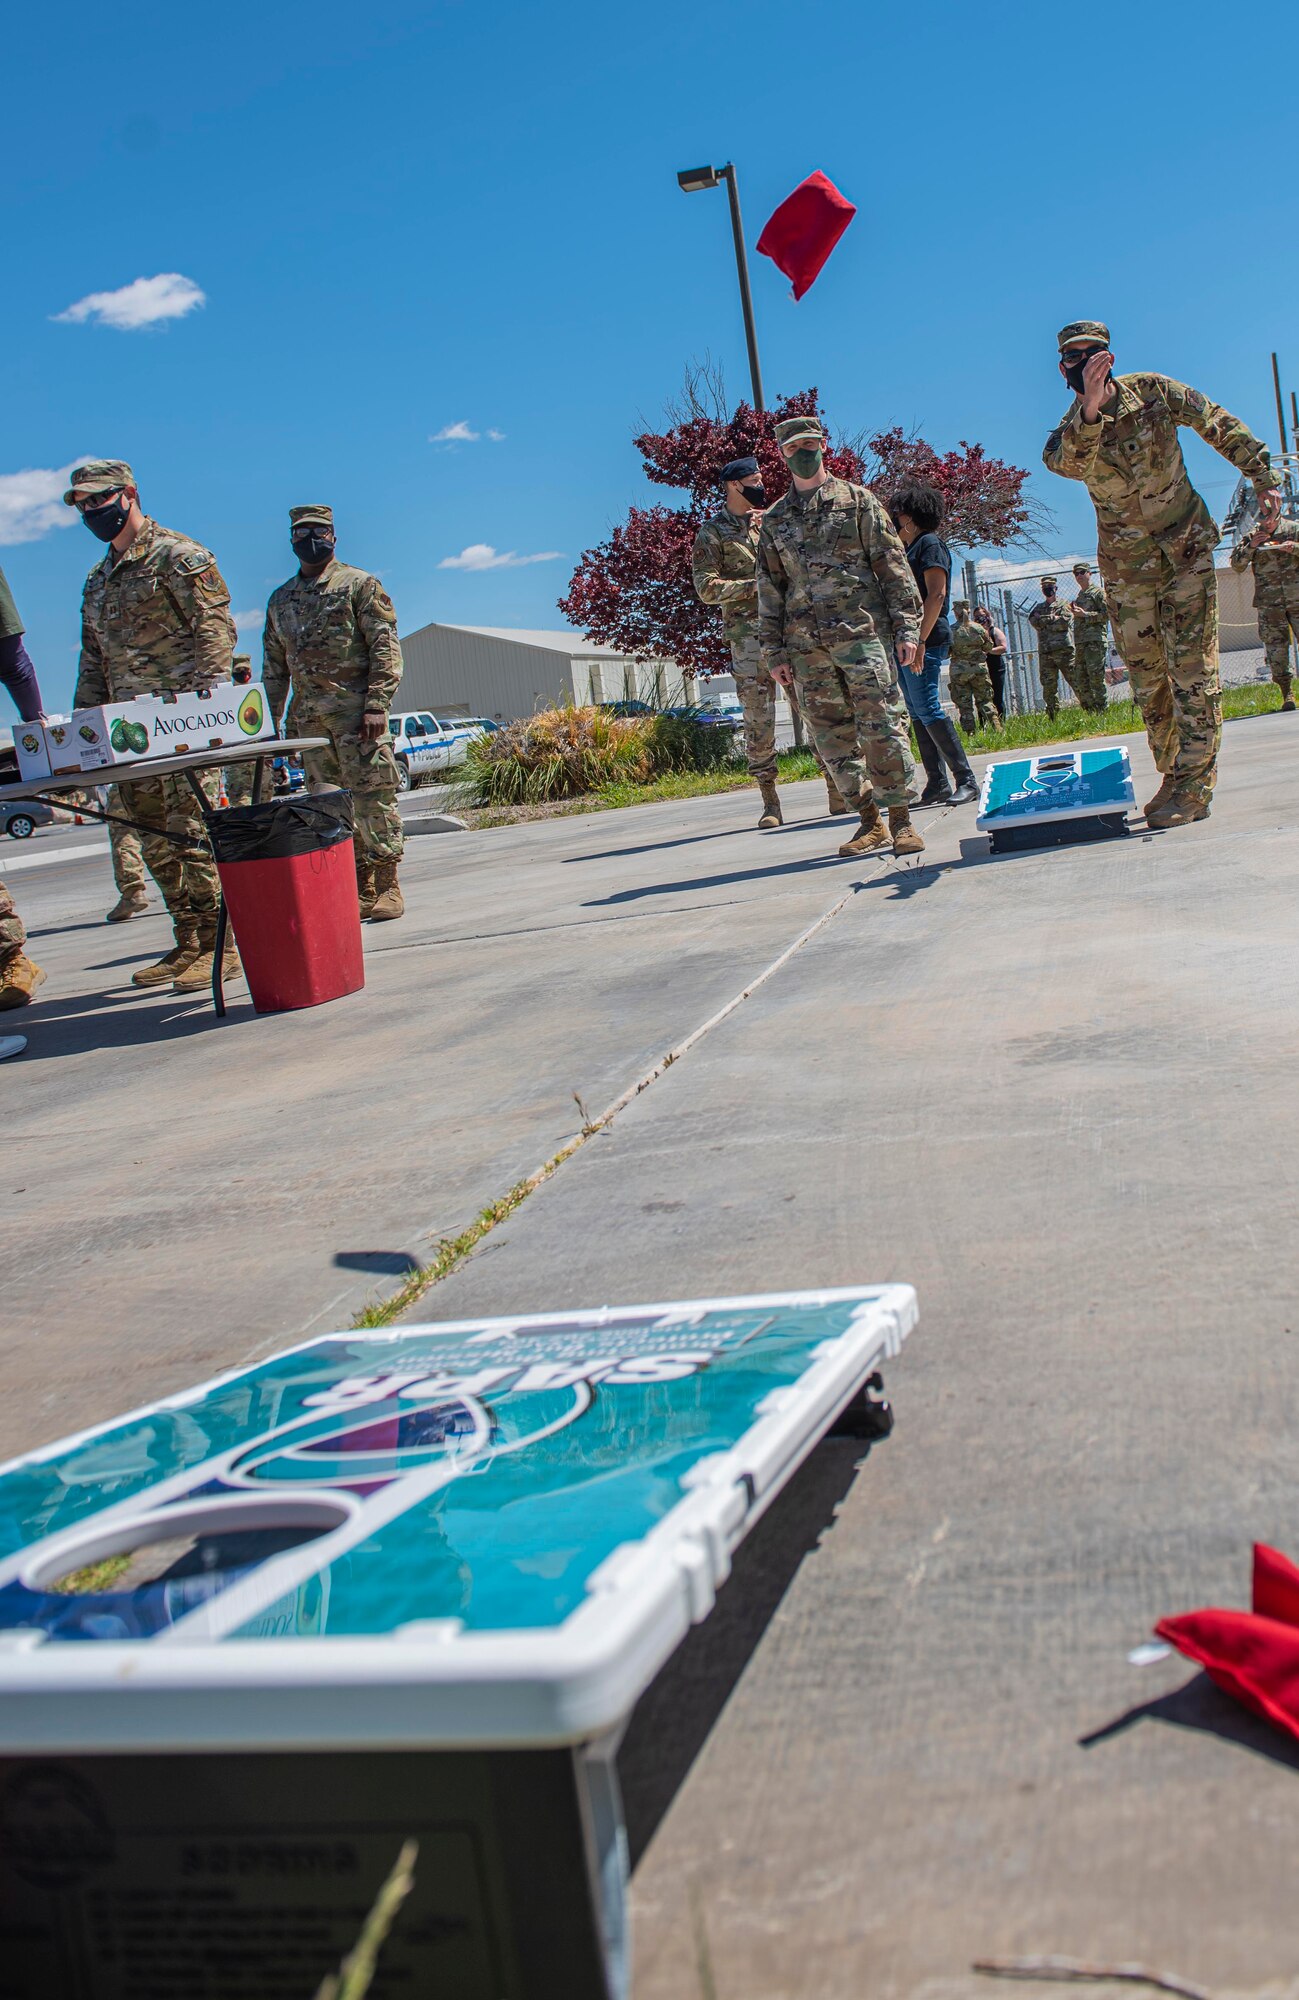 A male Airman has just tossed a cornhole bag and the bag is still mid-air before reaching the cornhole board at the other end of the photo.